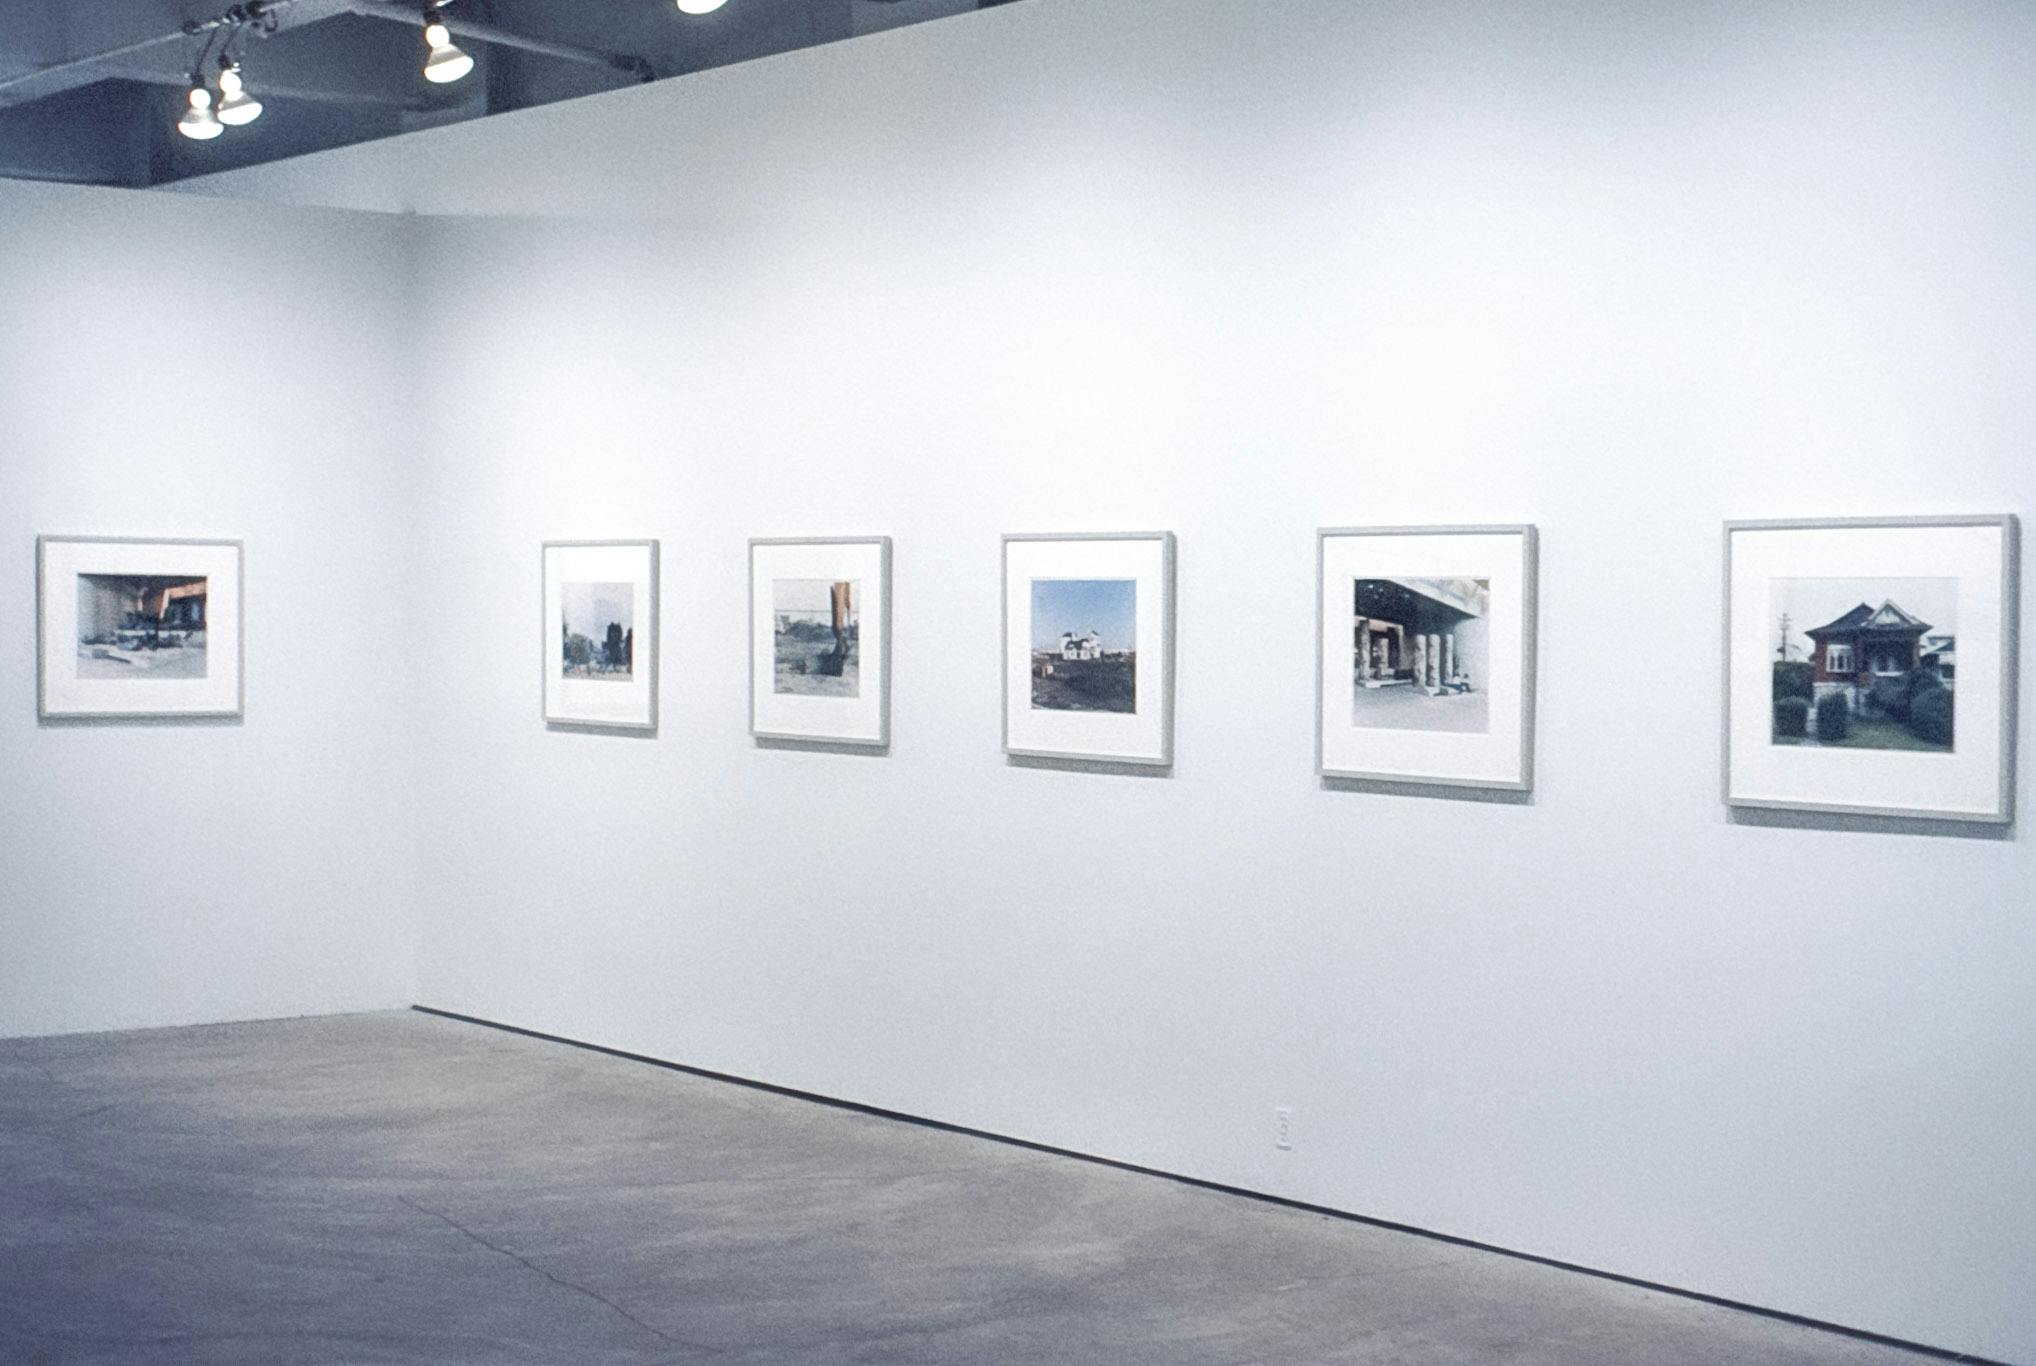 A gallery space with 6 framed photographic works mounted on the white walls. The works are both vertical and horizontal and depict city scenes, such as construction sites, houses, and underpasses.